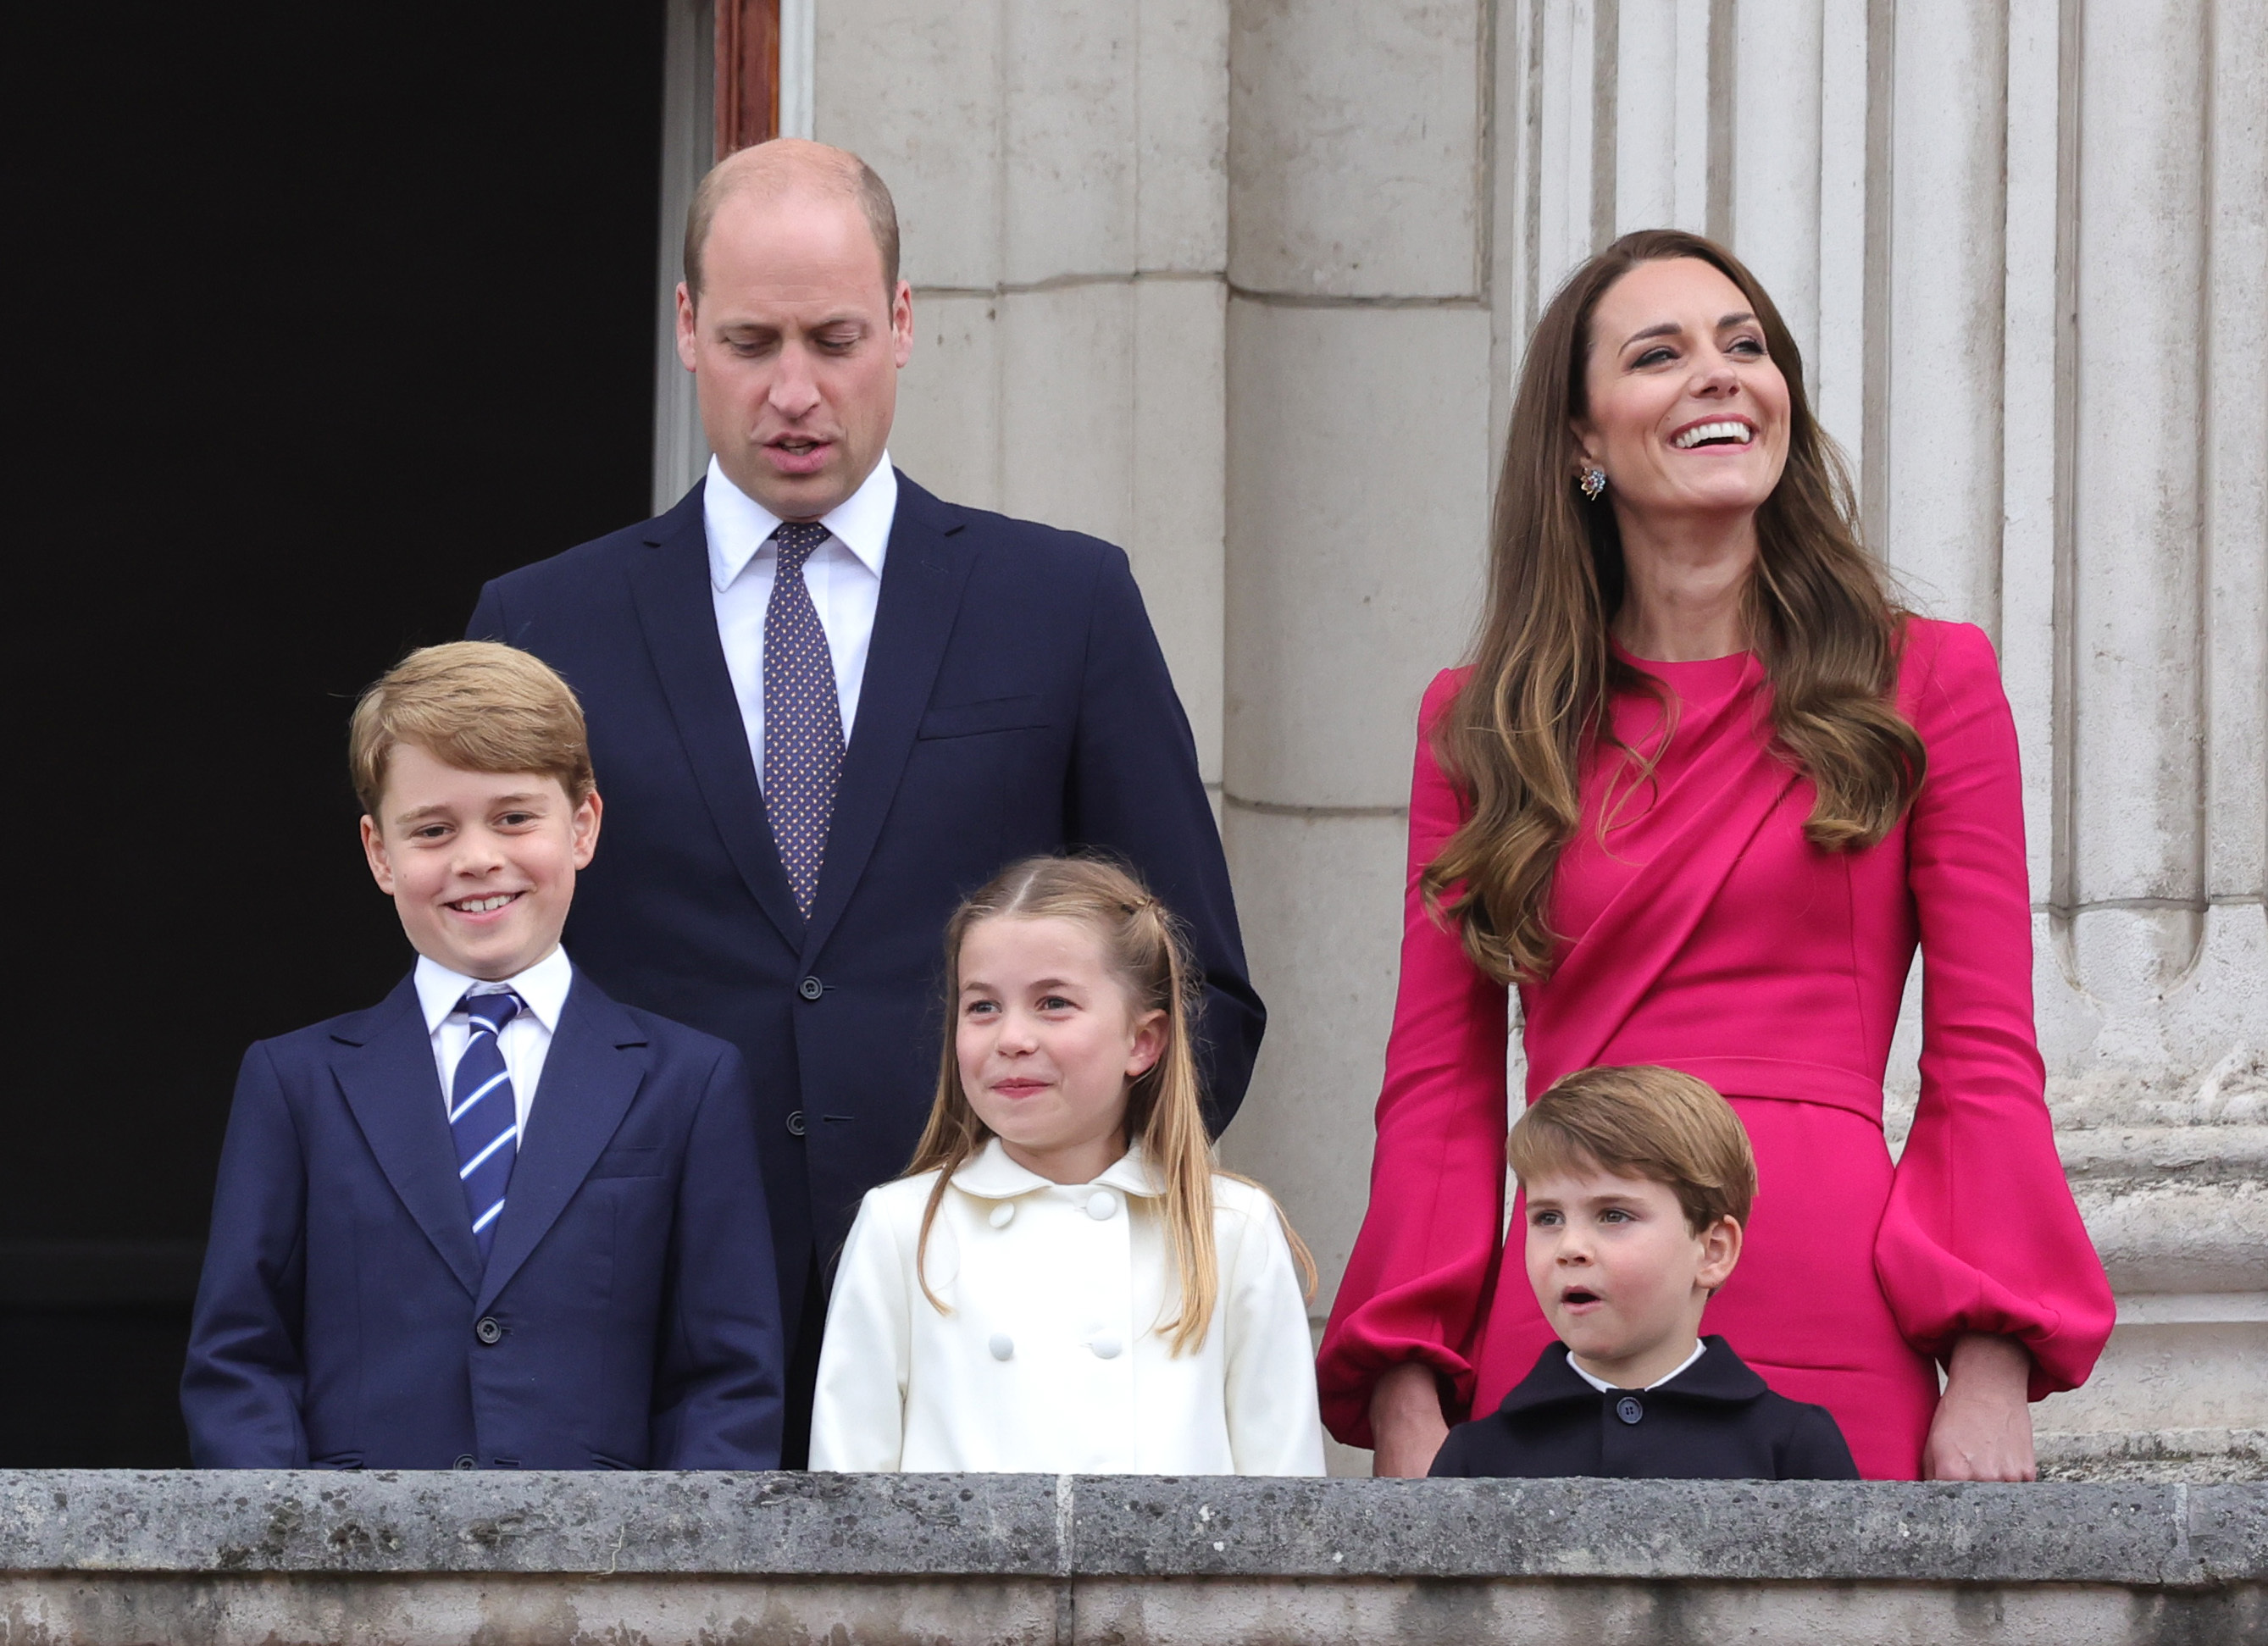 Prince George, the Duke of Cambridge, Princess Charlotte, Prince Louis and the Duchess of Cambridge stand on the balcony during the Platinum Jubilee Pageant at Buckingham Palace, London, on day four of the Platinum Jubilee celebrations